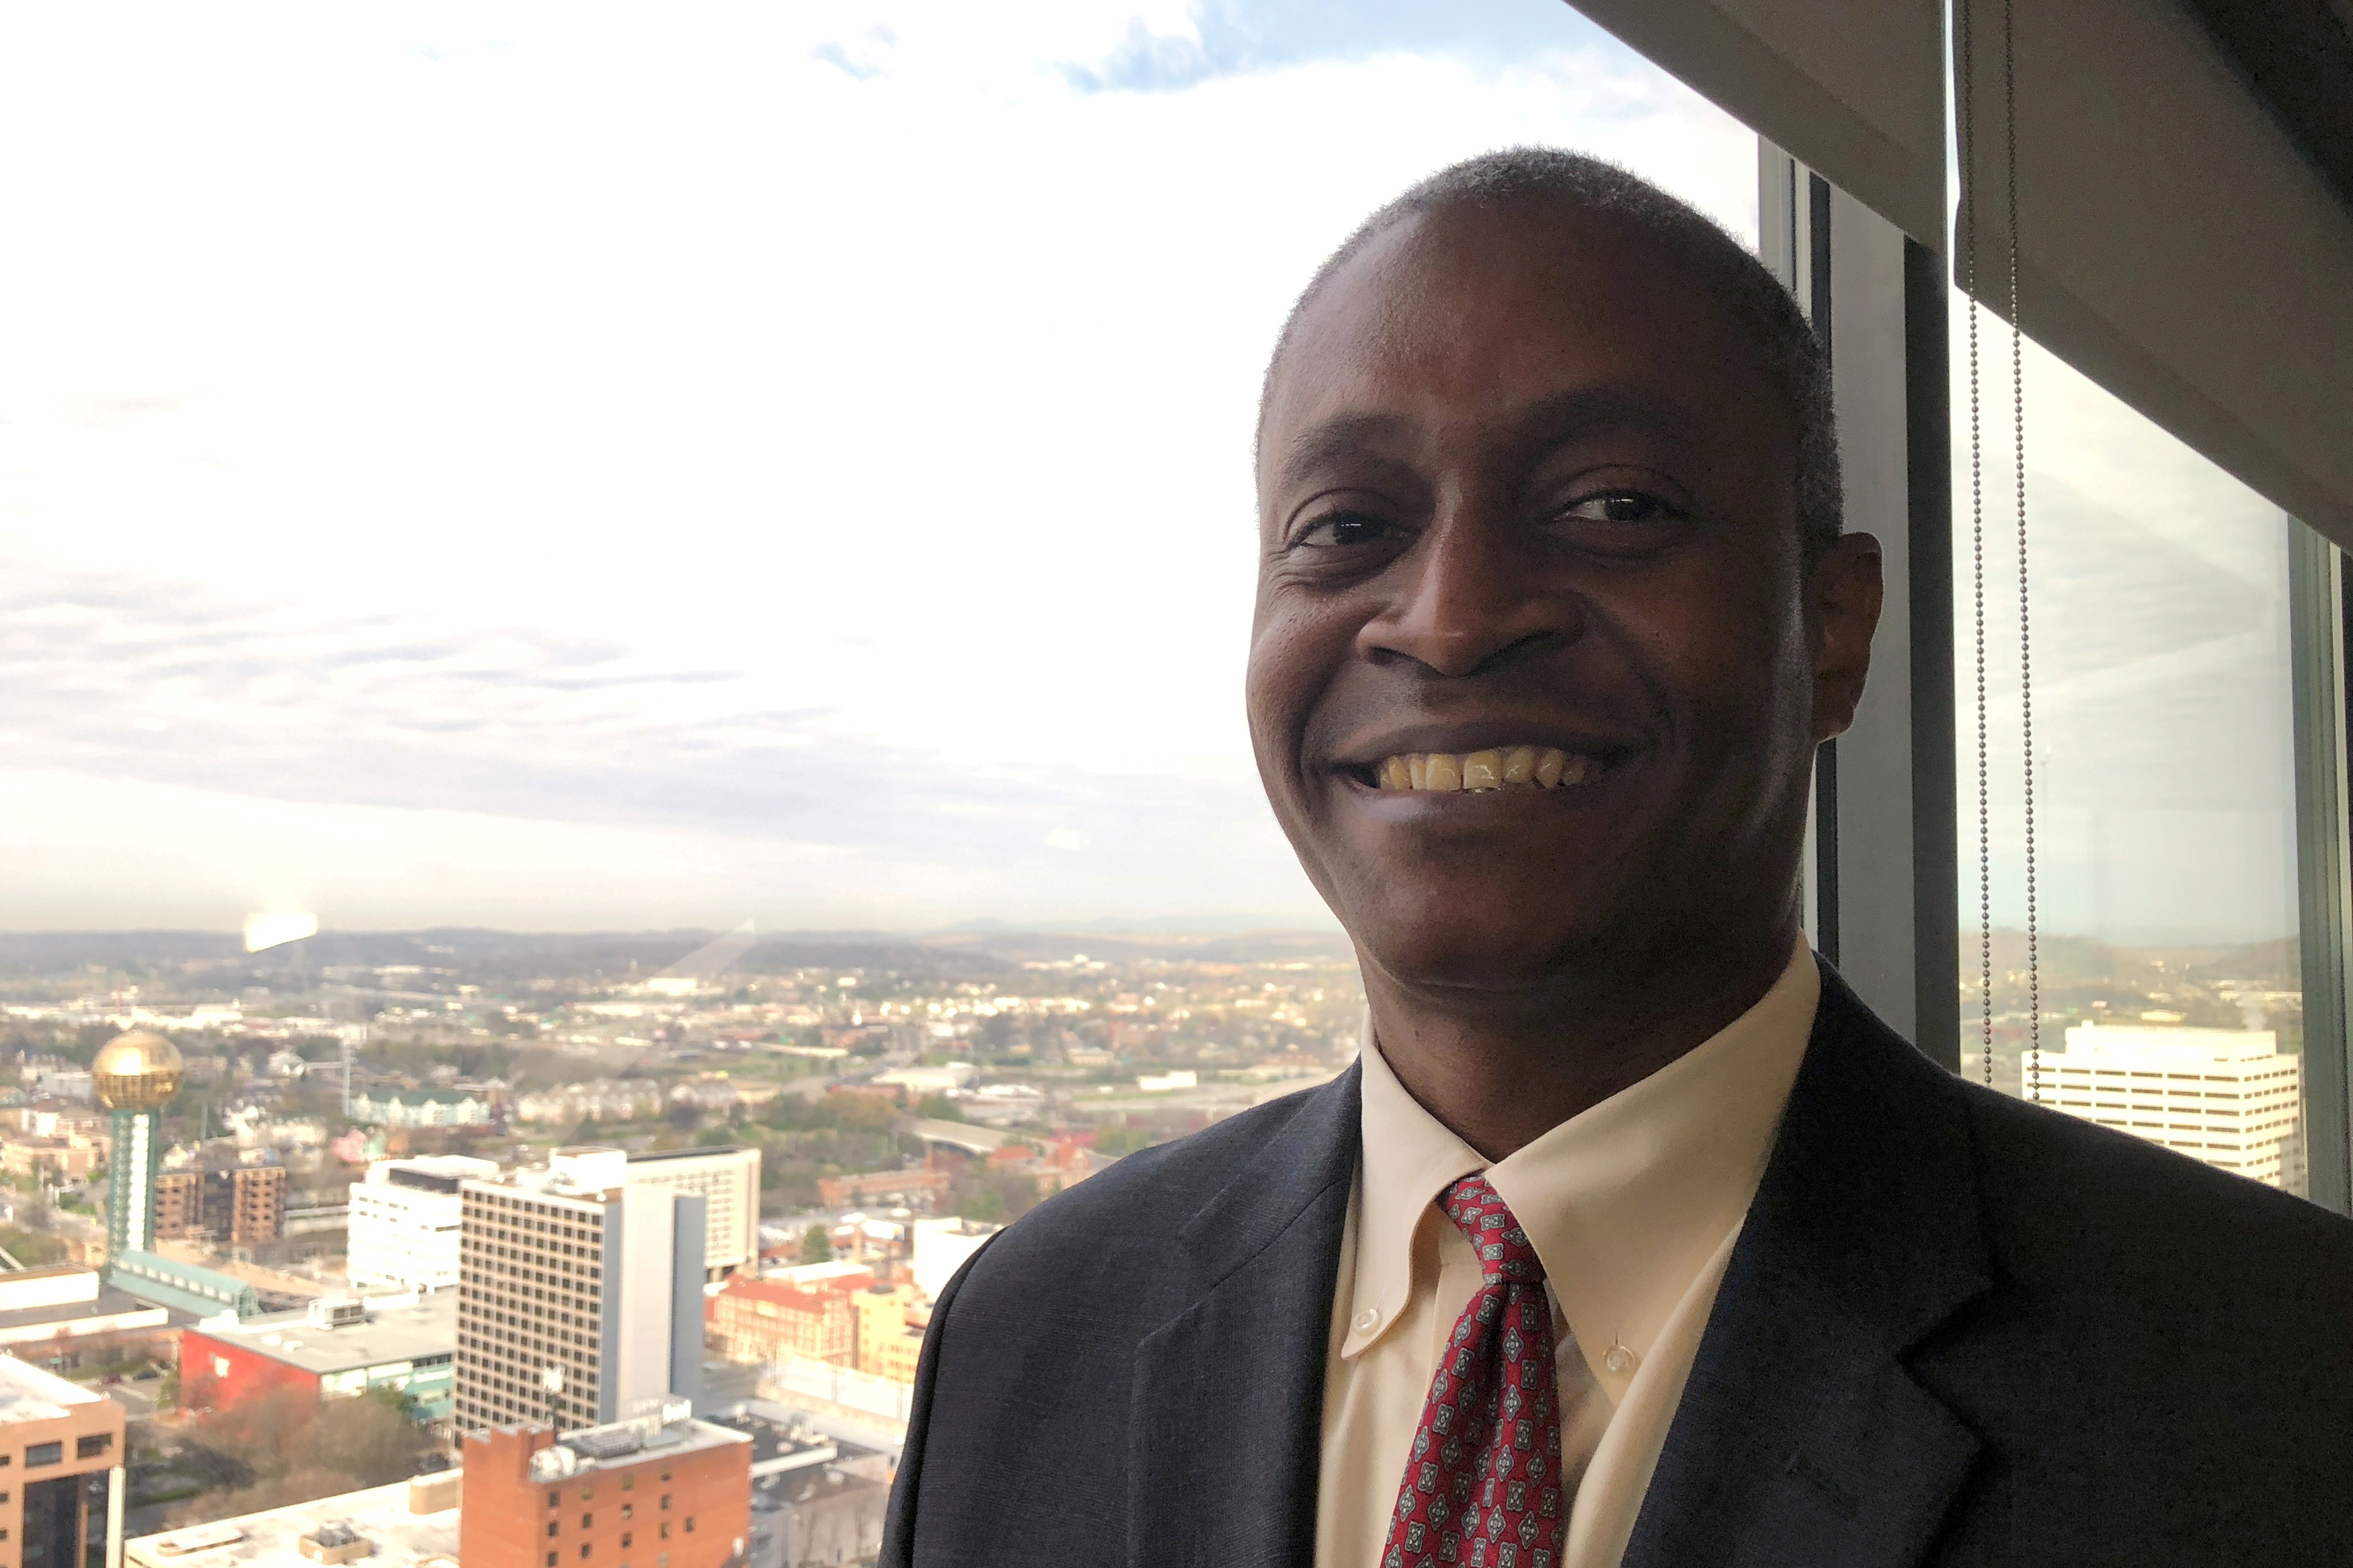 Raphael Bostic, president of the Federal Reserve Bank of Atlanta, poses for a photo in Knoxville